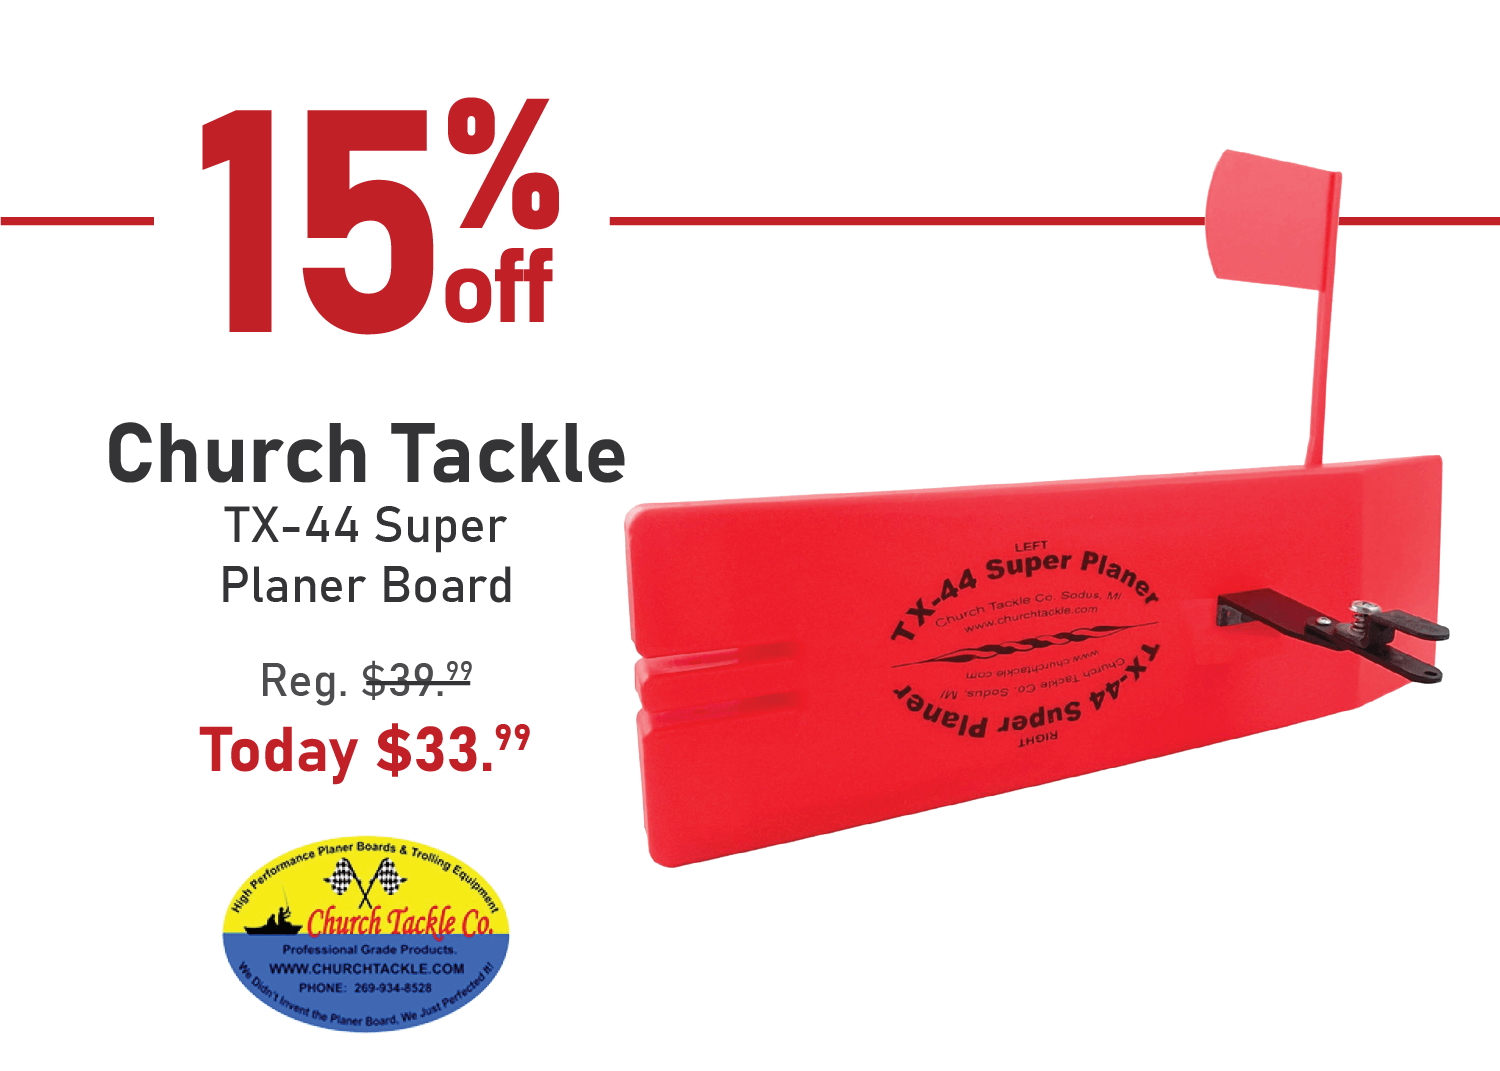 Save 15% on the Church Tackle TX-44 Super Planer Board